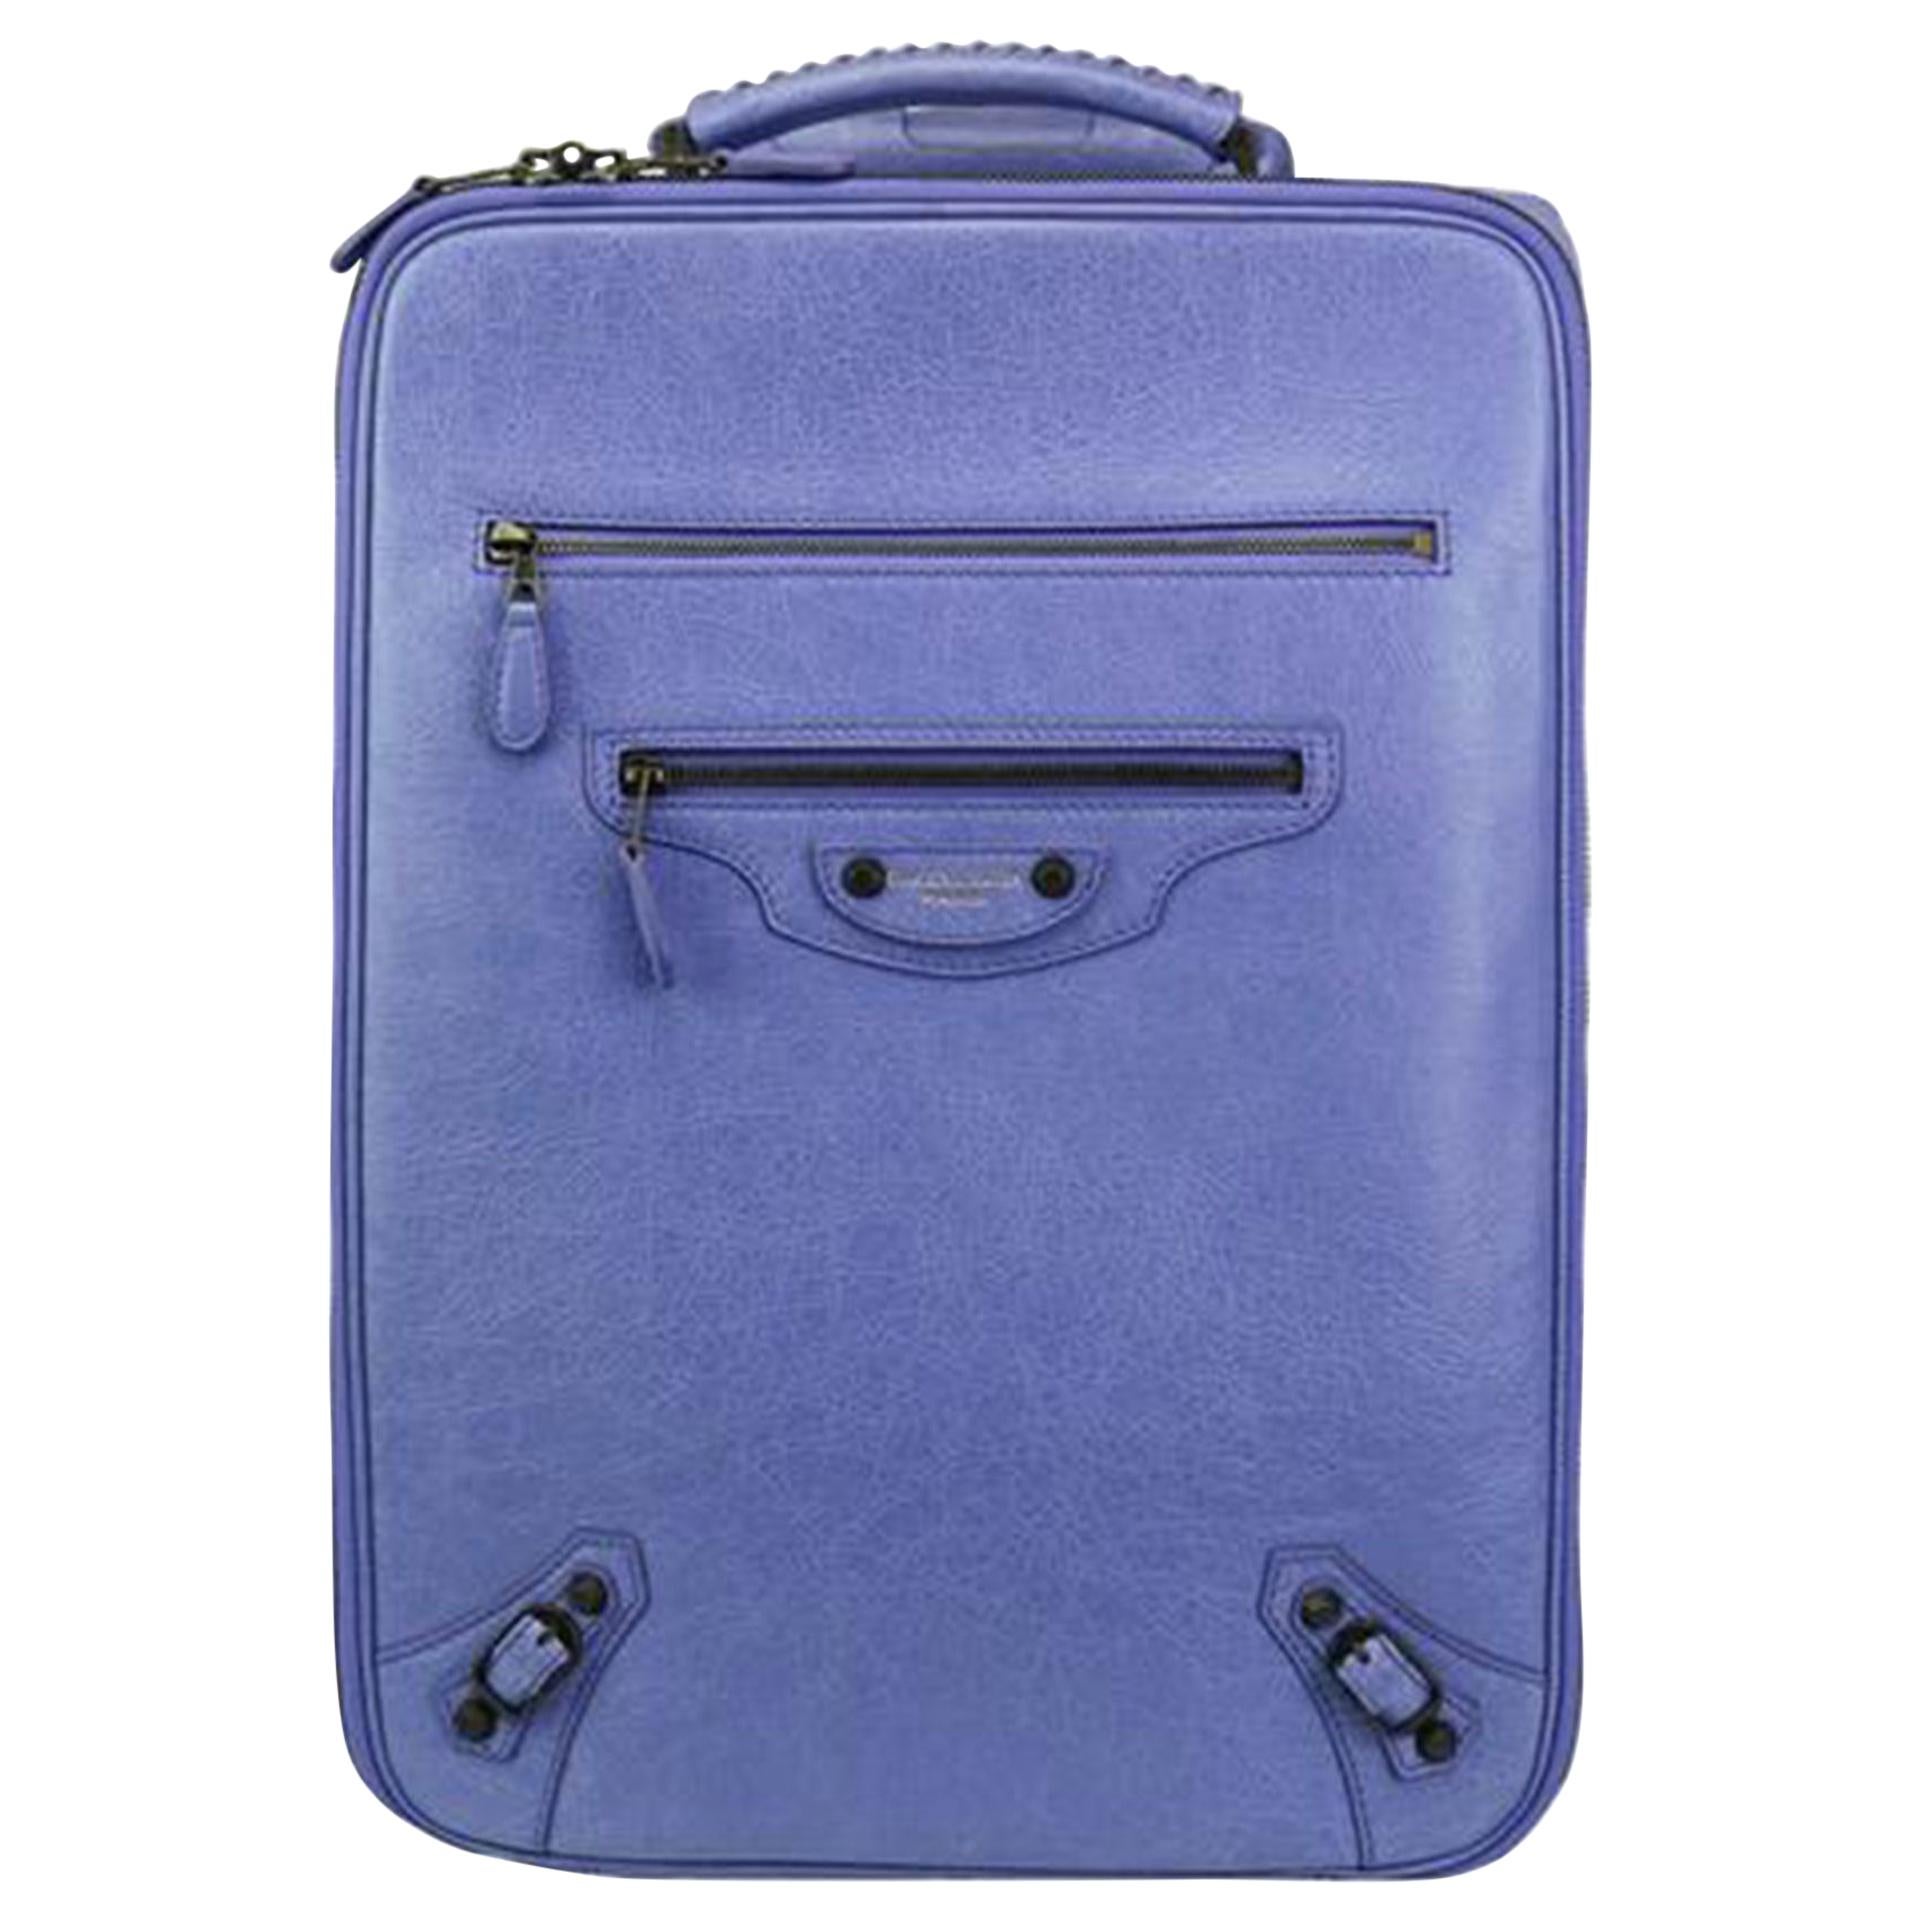 Balenciaga 2013 Rare Limited Edition Periwinkle Blue Jacynthe Wheeled Carry-On

Balenciaga Wheeled Carry-On, features soft lambskin and distinctive aged brass hardware.
Black perforated soft lambskin with aged brass hardware, including stud and